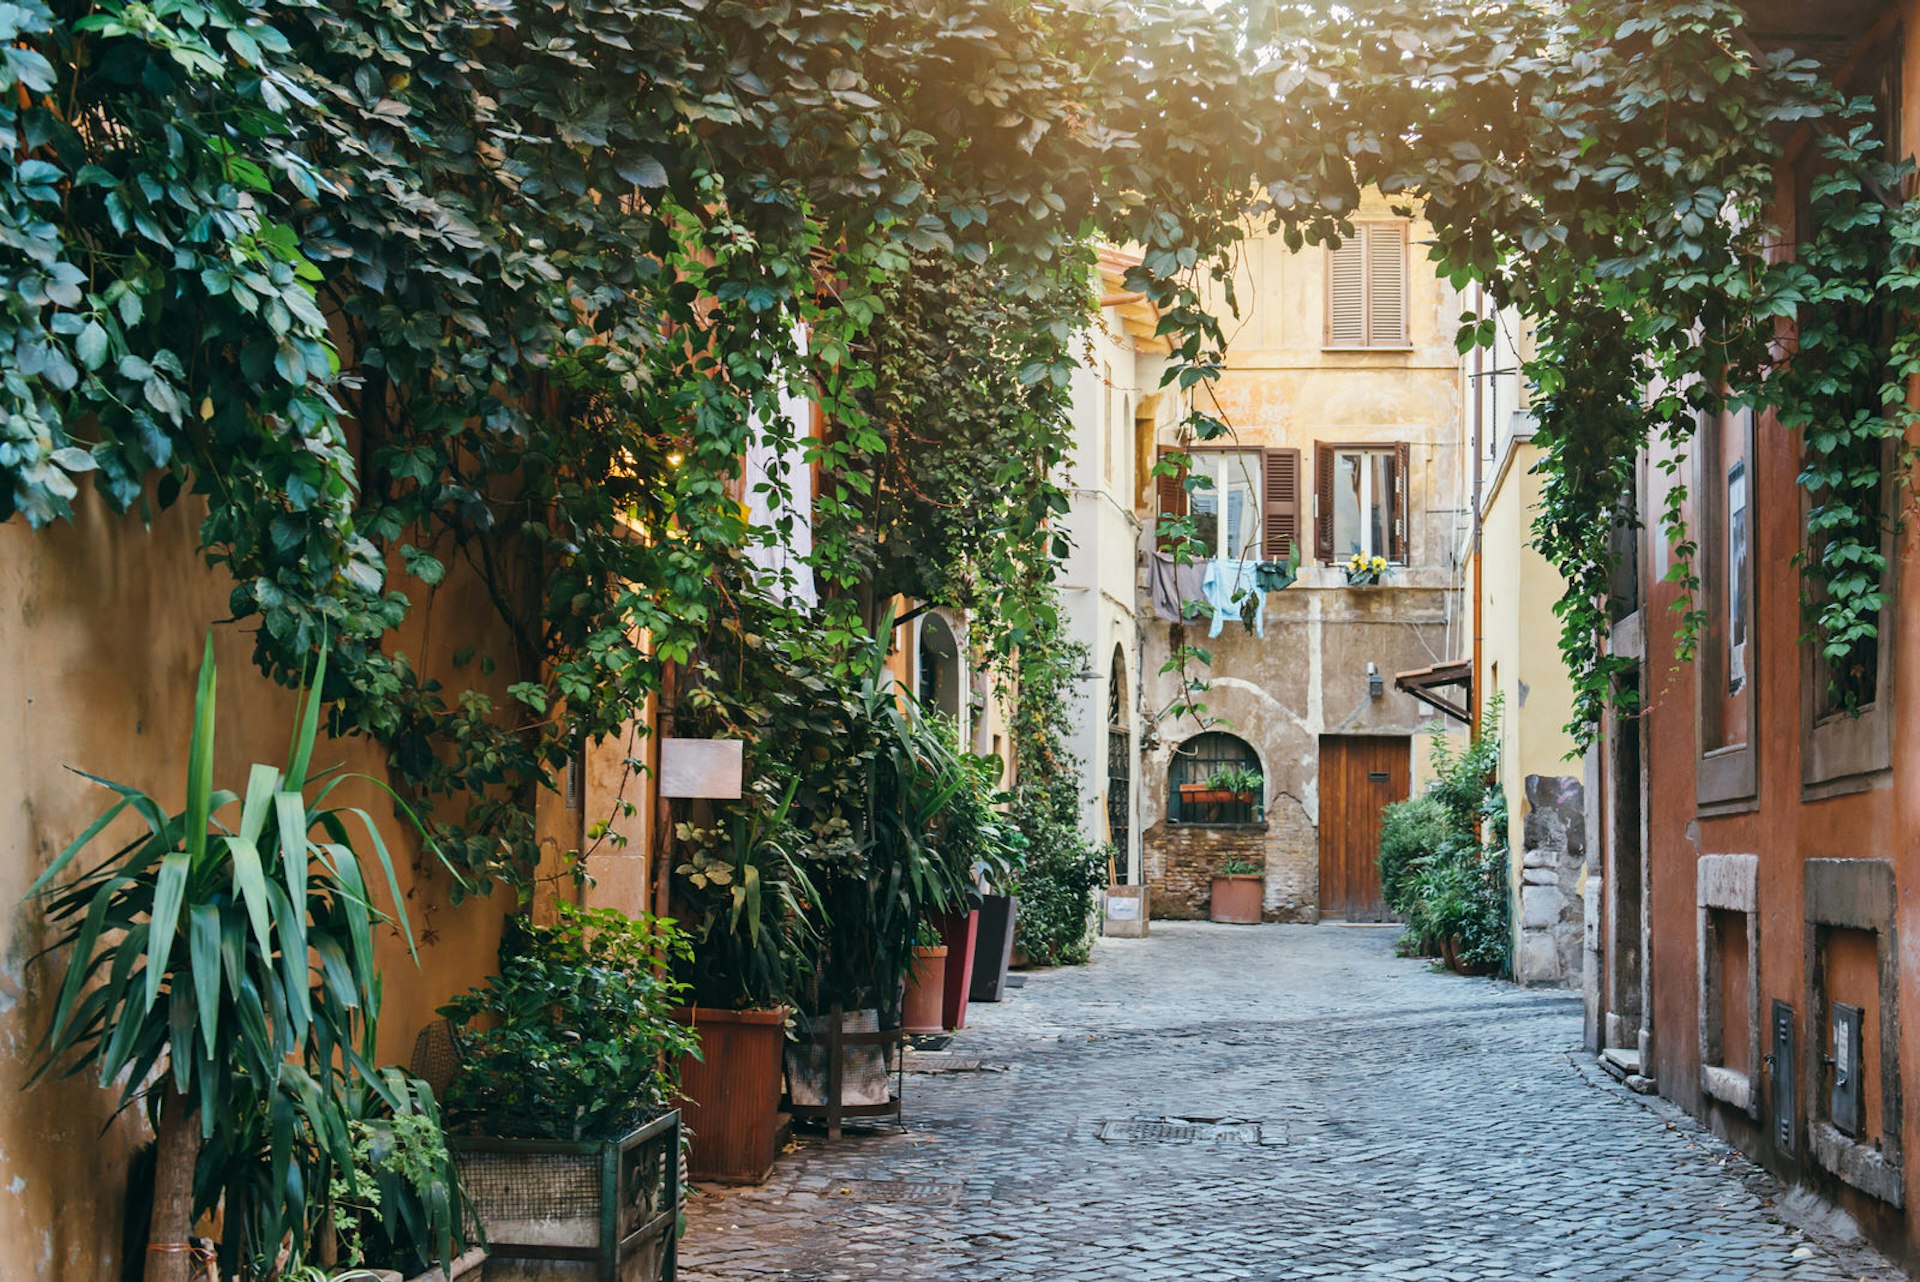 A cobbled street lined with ivy in Trastevere, Rome, Italy